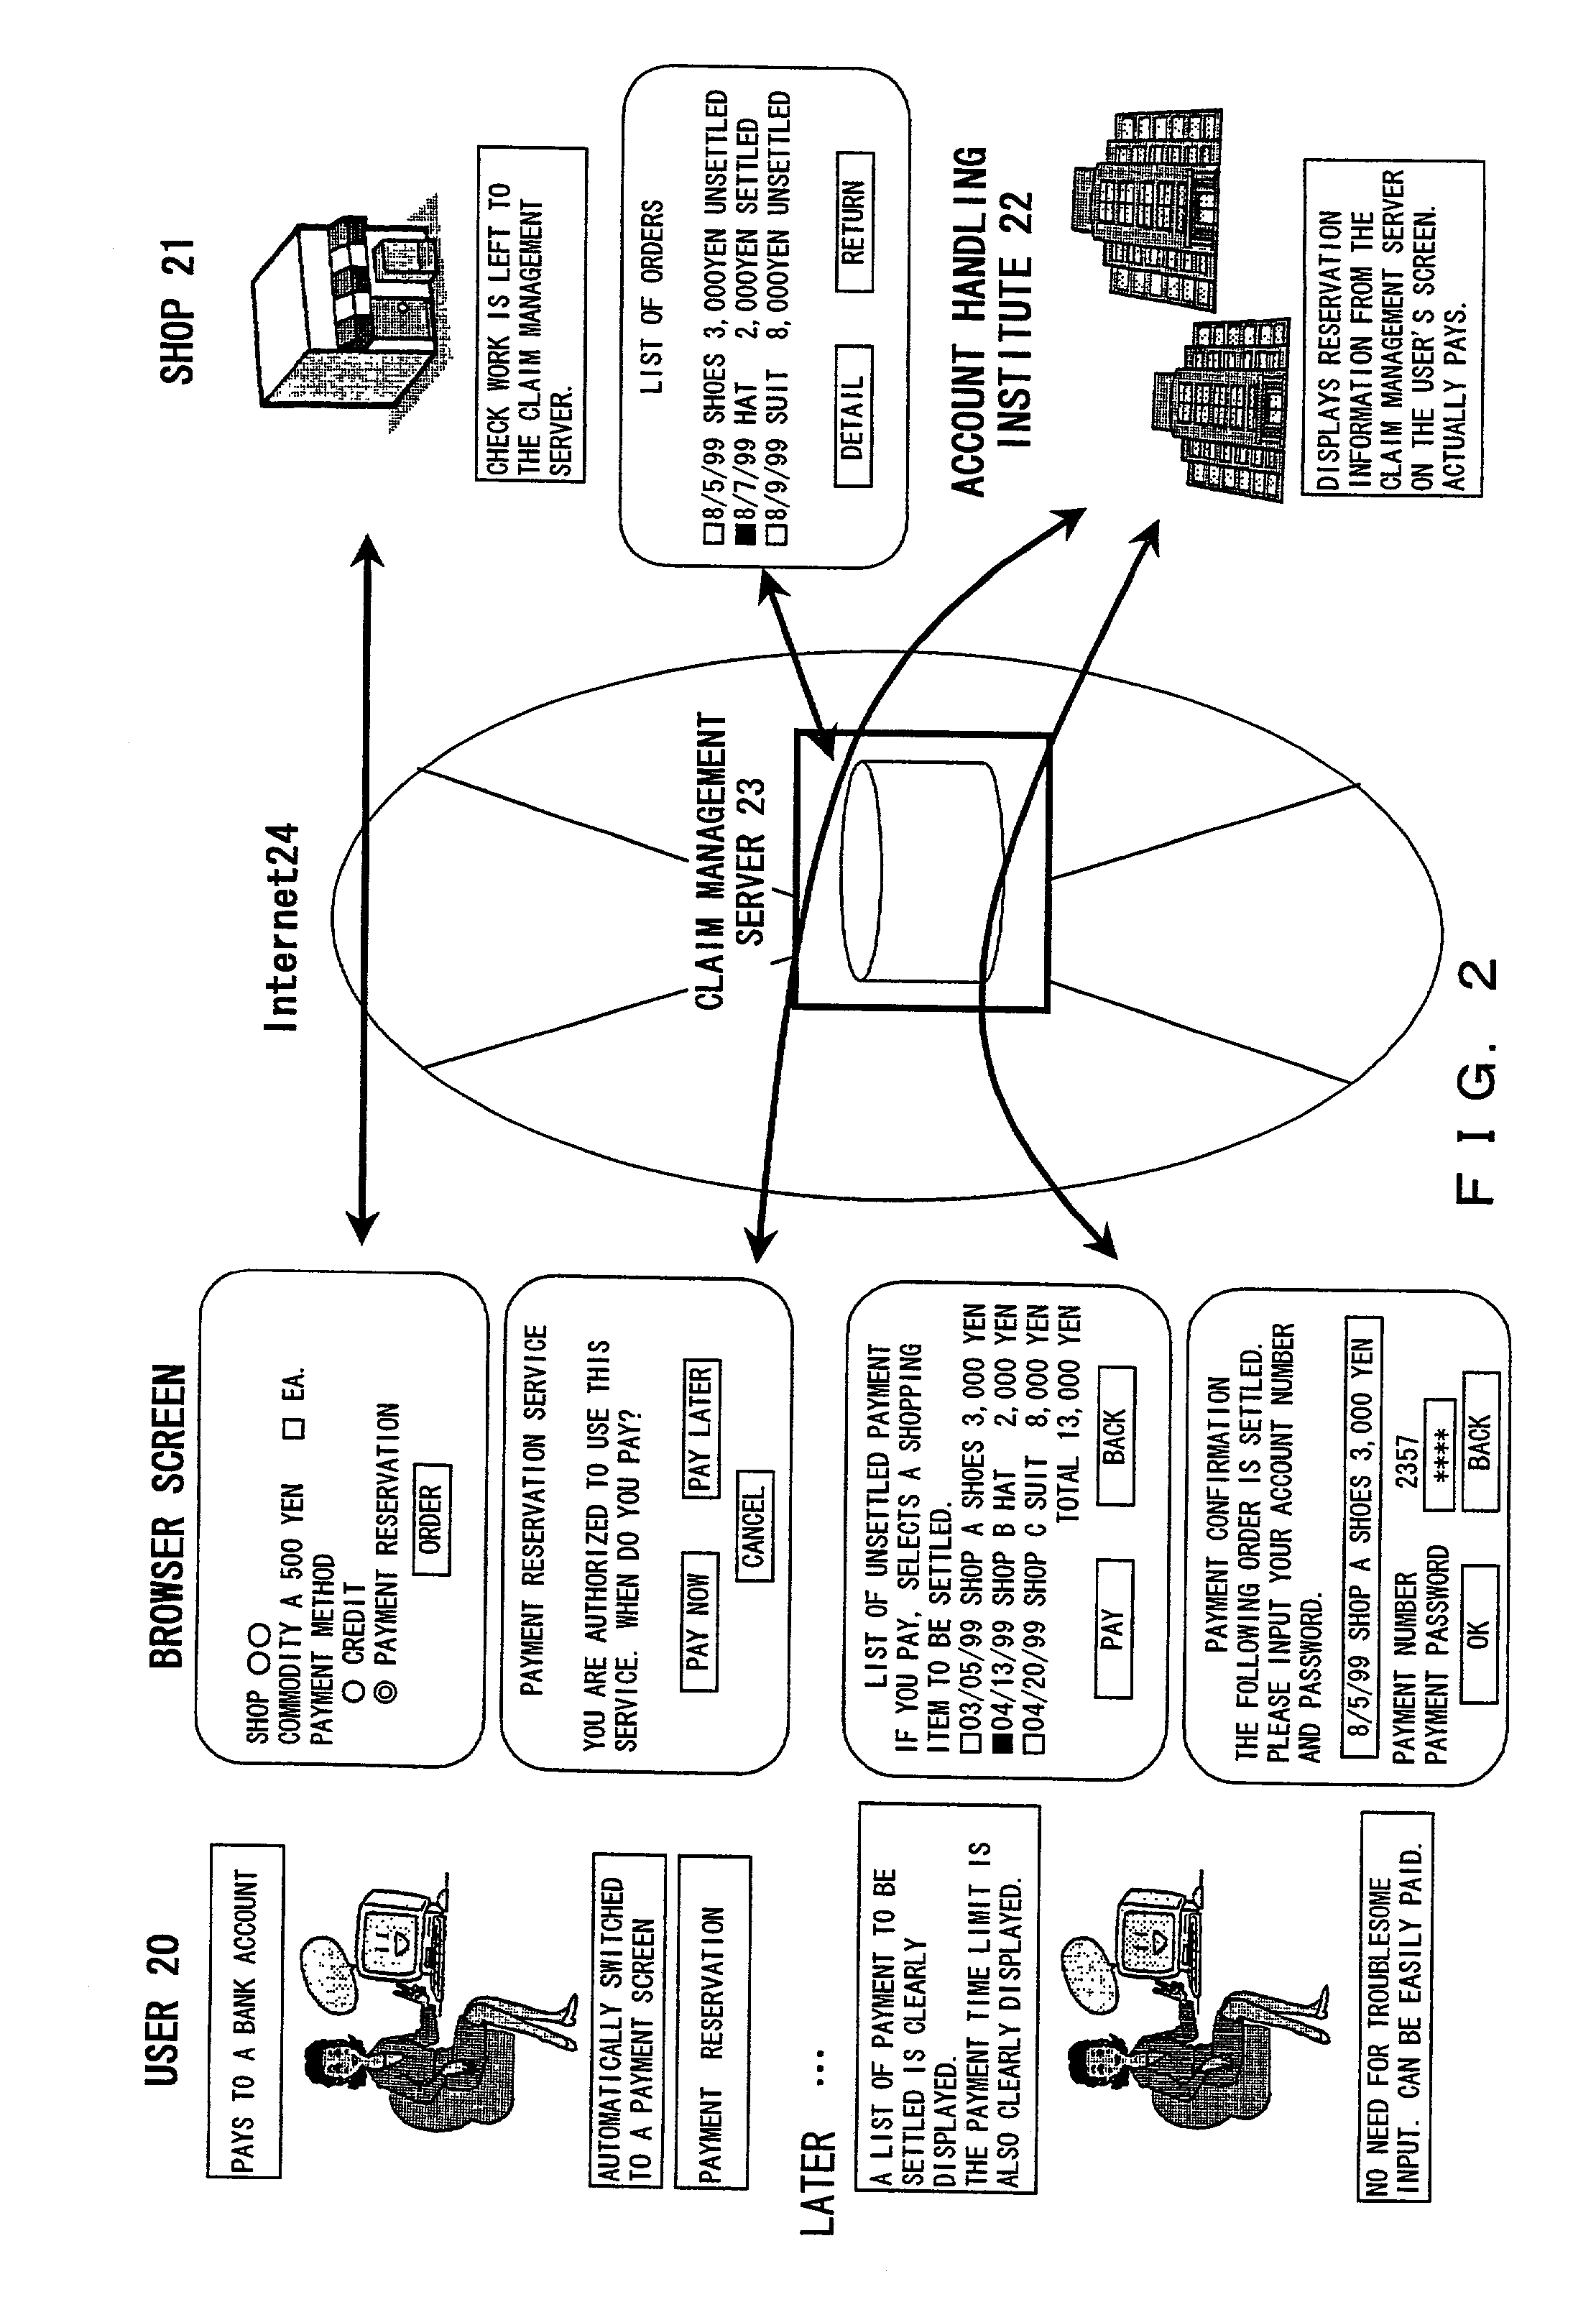 Online settlement system, method thereof and storage medium